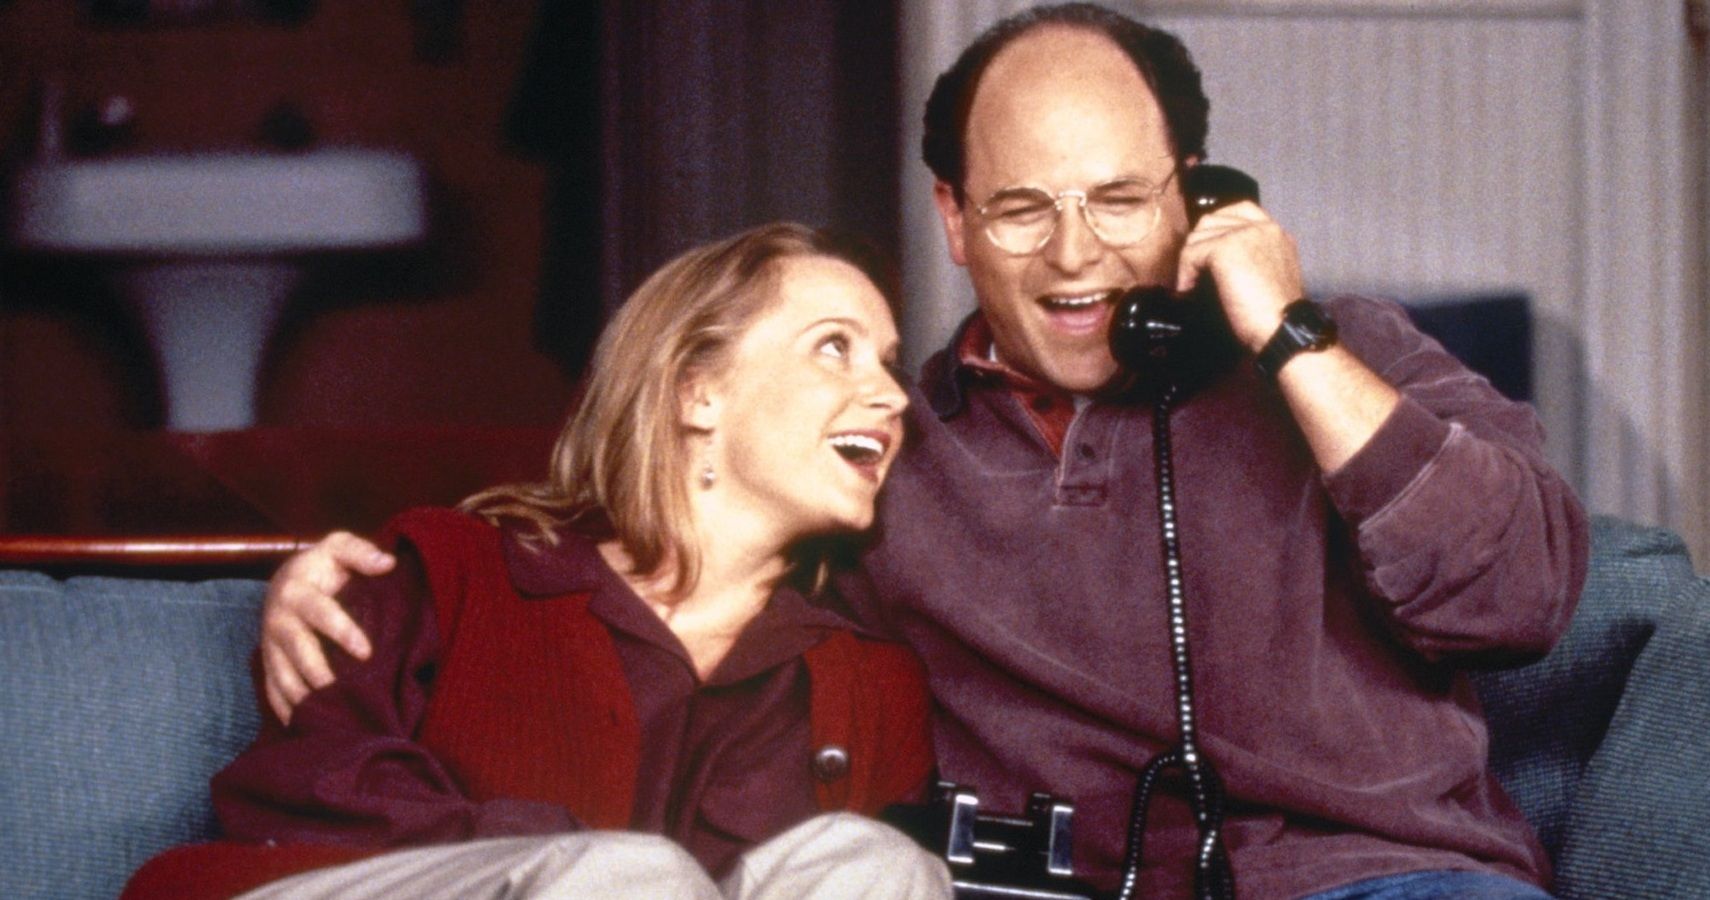 George and Susan in Seinfeld 1